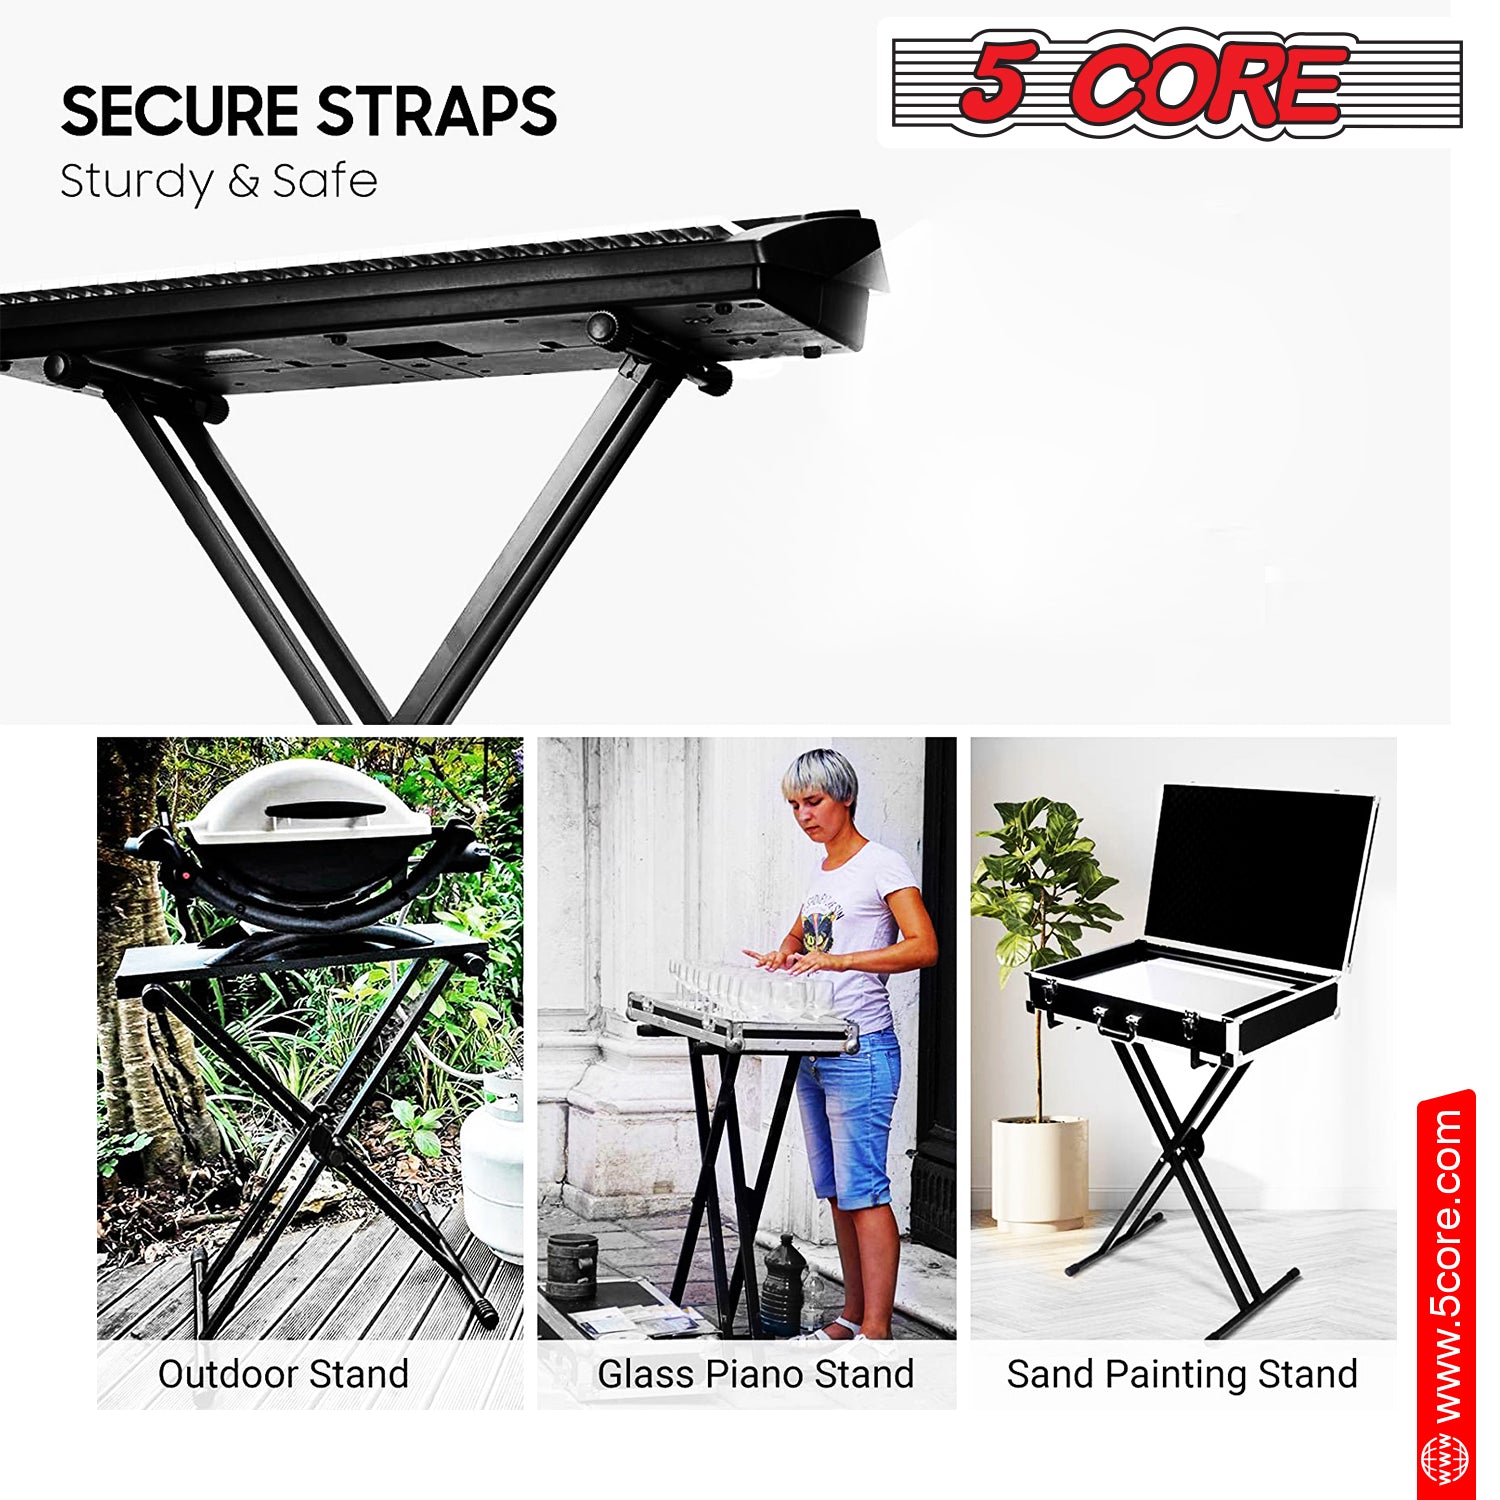 5 Core Keyboard Stand Riser • Double Braced X Style Adjustable Width and Height Keyboard Holder